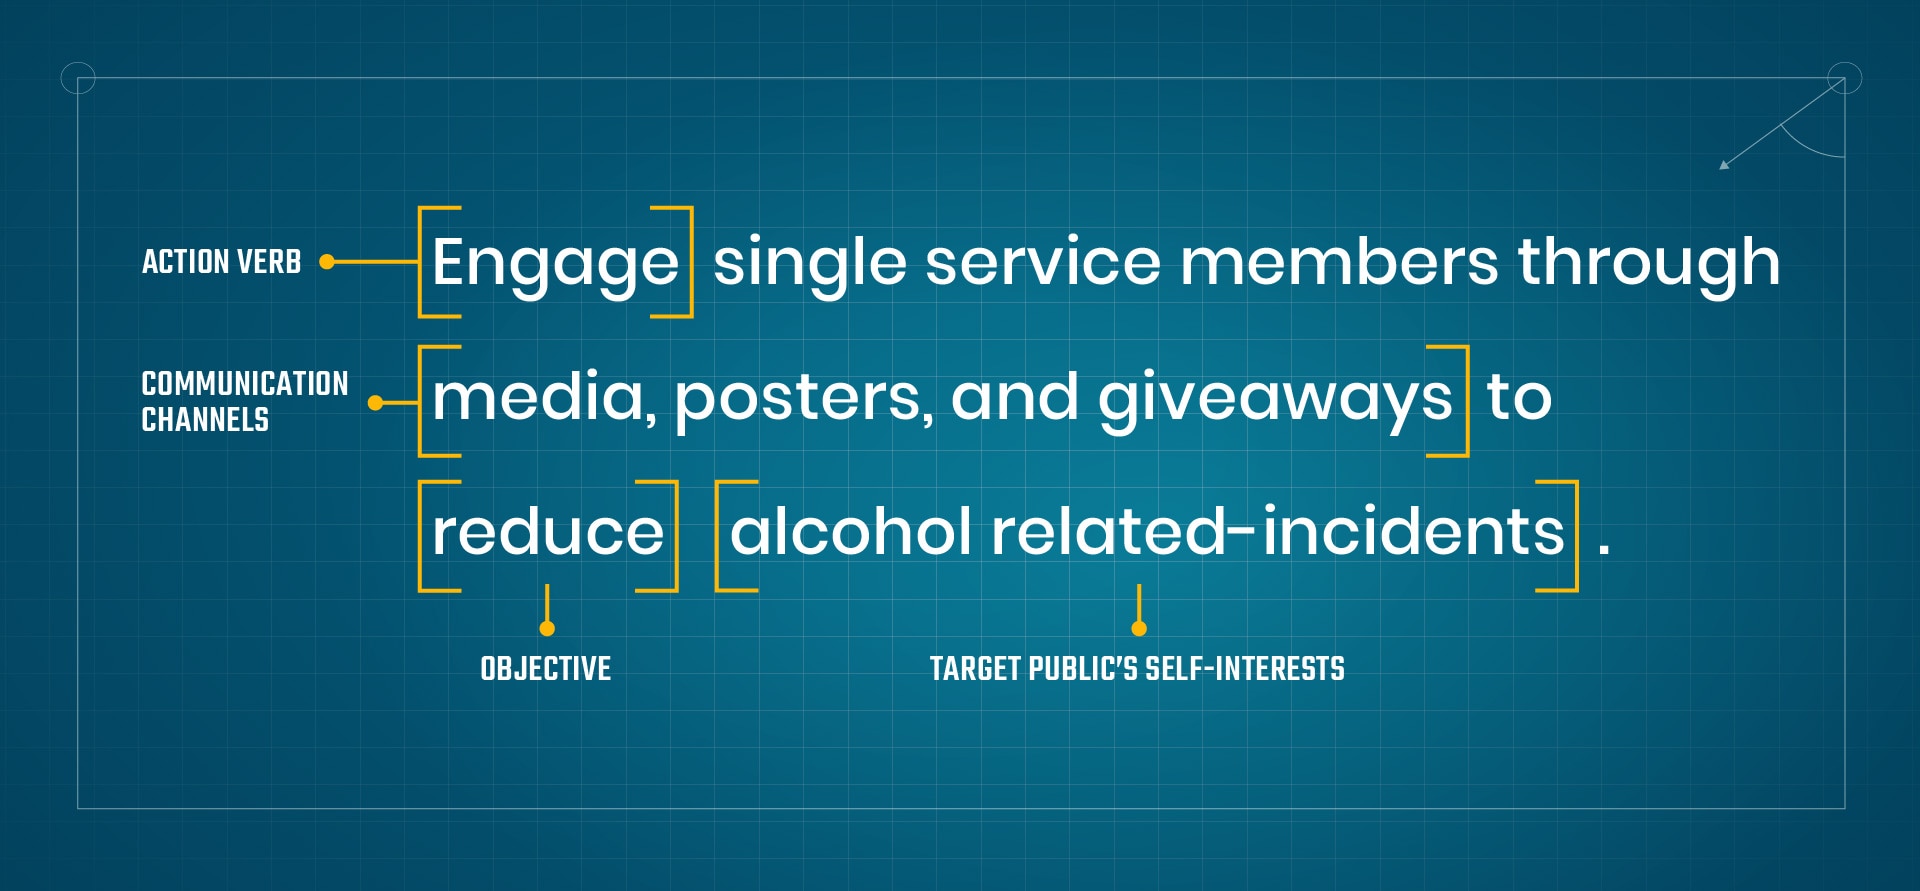 Engage single service members through media, posters and giveaways to reduce alcohol-related incidents. Engage is the action verb. Media, posters and giveaways are the communication channels. Reduce is the objective. Alcohol related incidents is the target public's self interests.